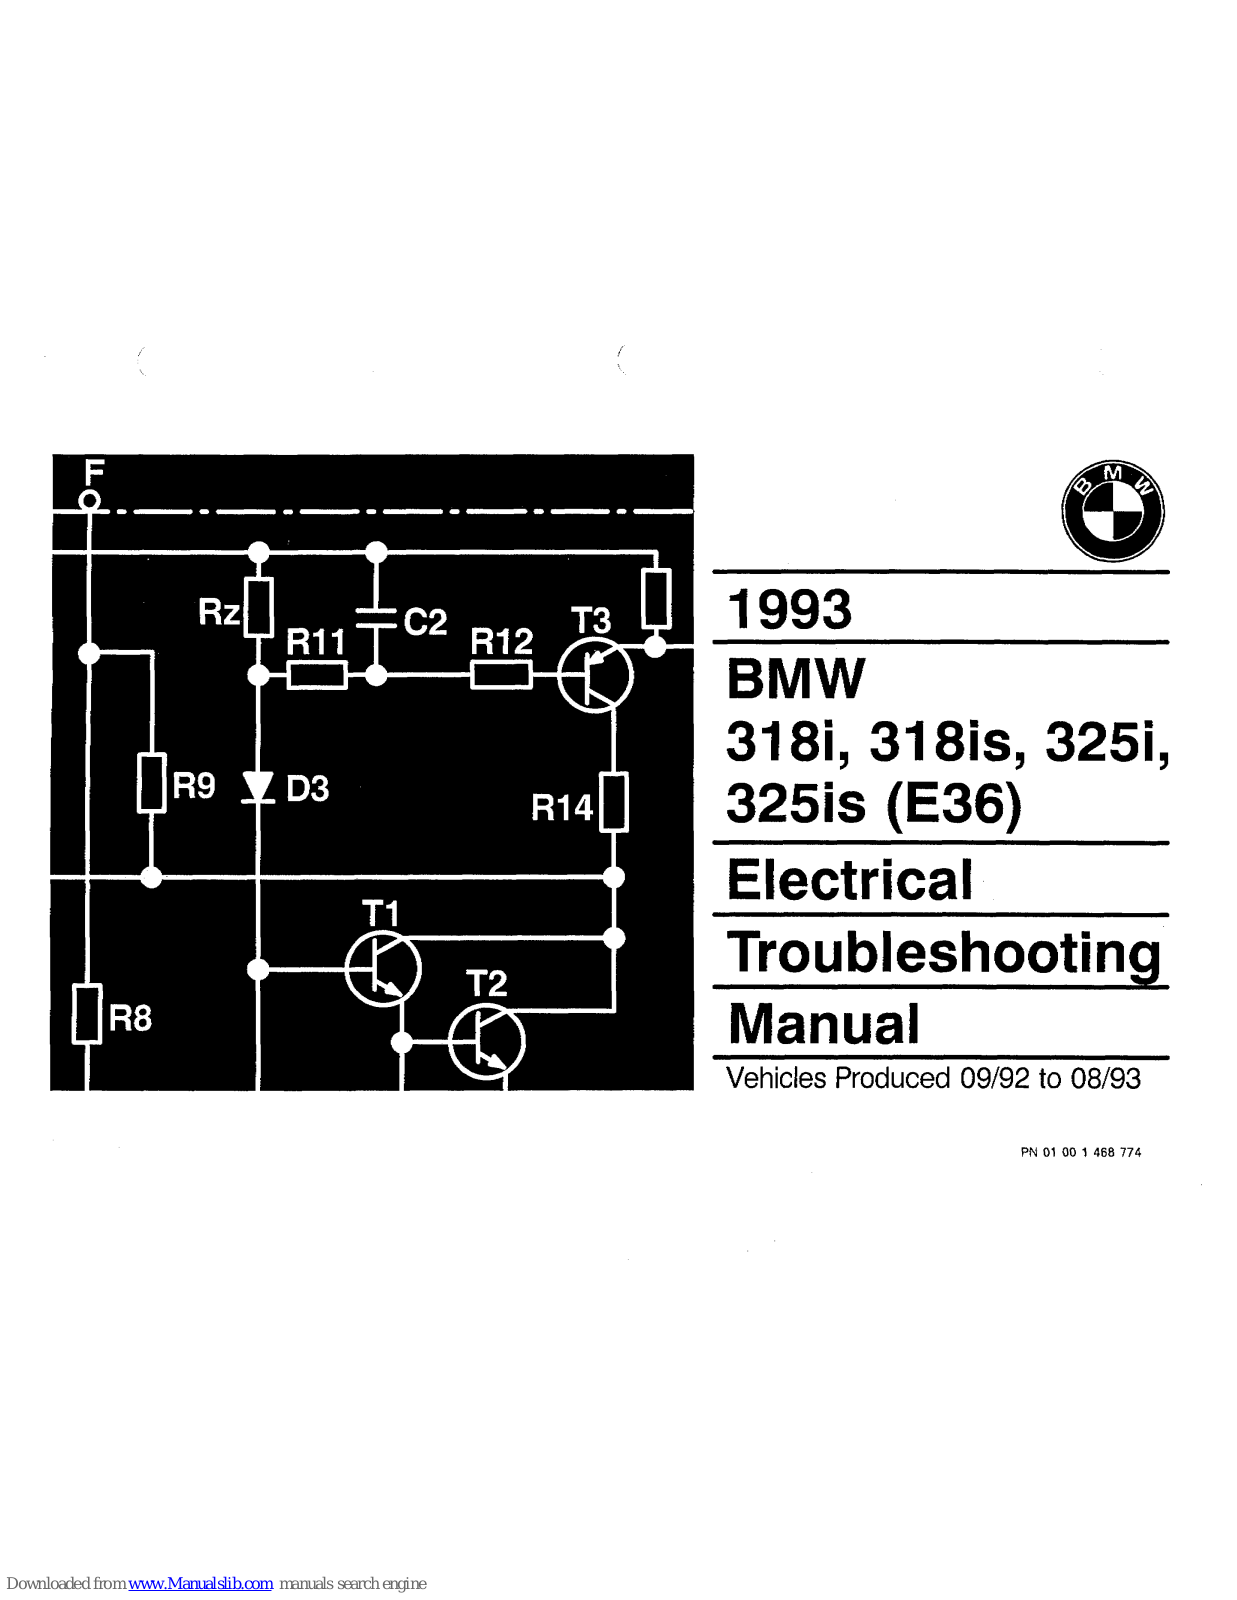 BMW 318i, 318is, 325i, 325is, E36 Electrical Troubleshooting Manual